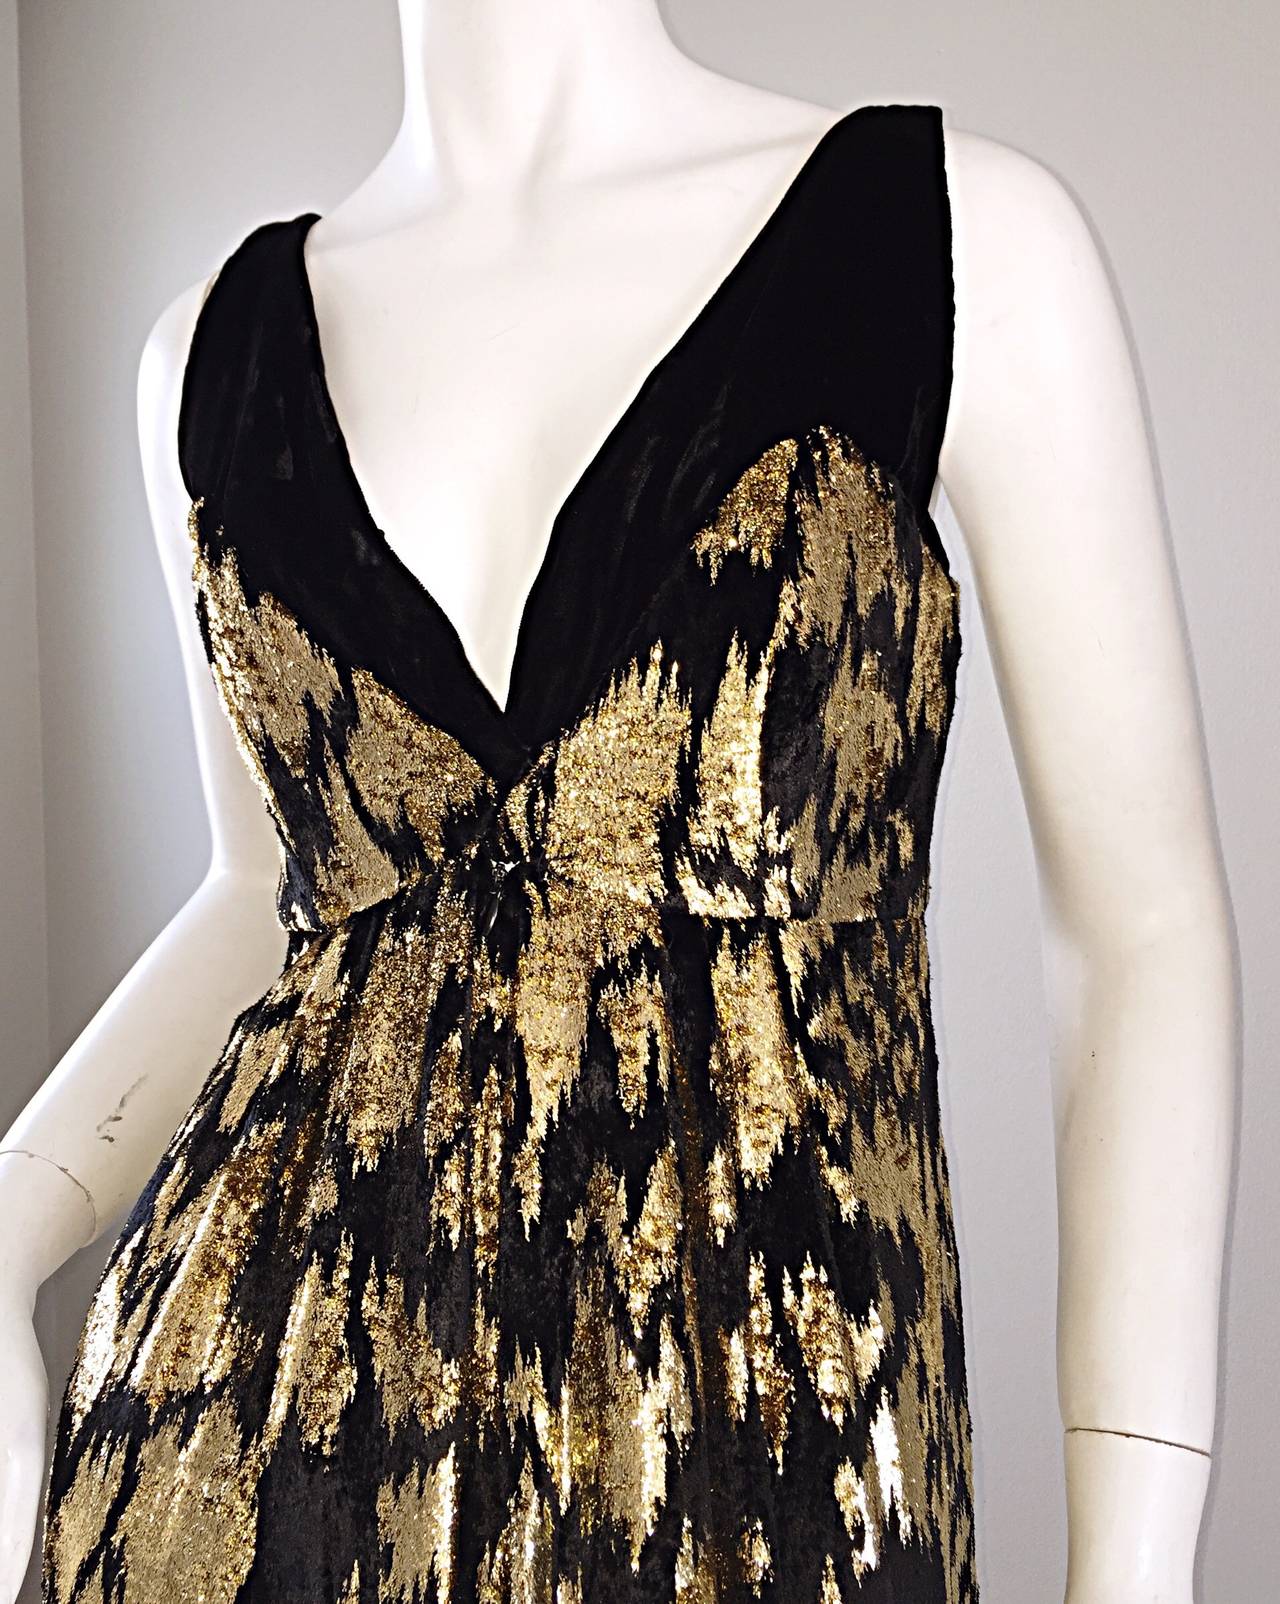 Absolutley stunning vintage Richilene dress / gown! Luxurious soft silk velvet, with gold metallic silk thread throughout. Empire waist is both flattering, and forgiving. A one of a kind find, from a hard to find designer. A definite head turner!